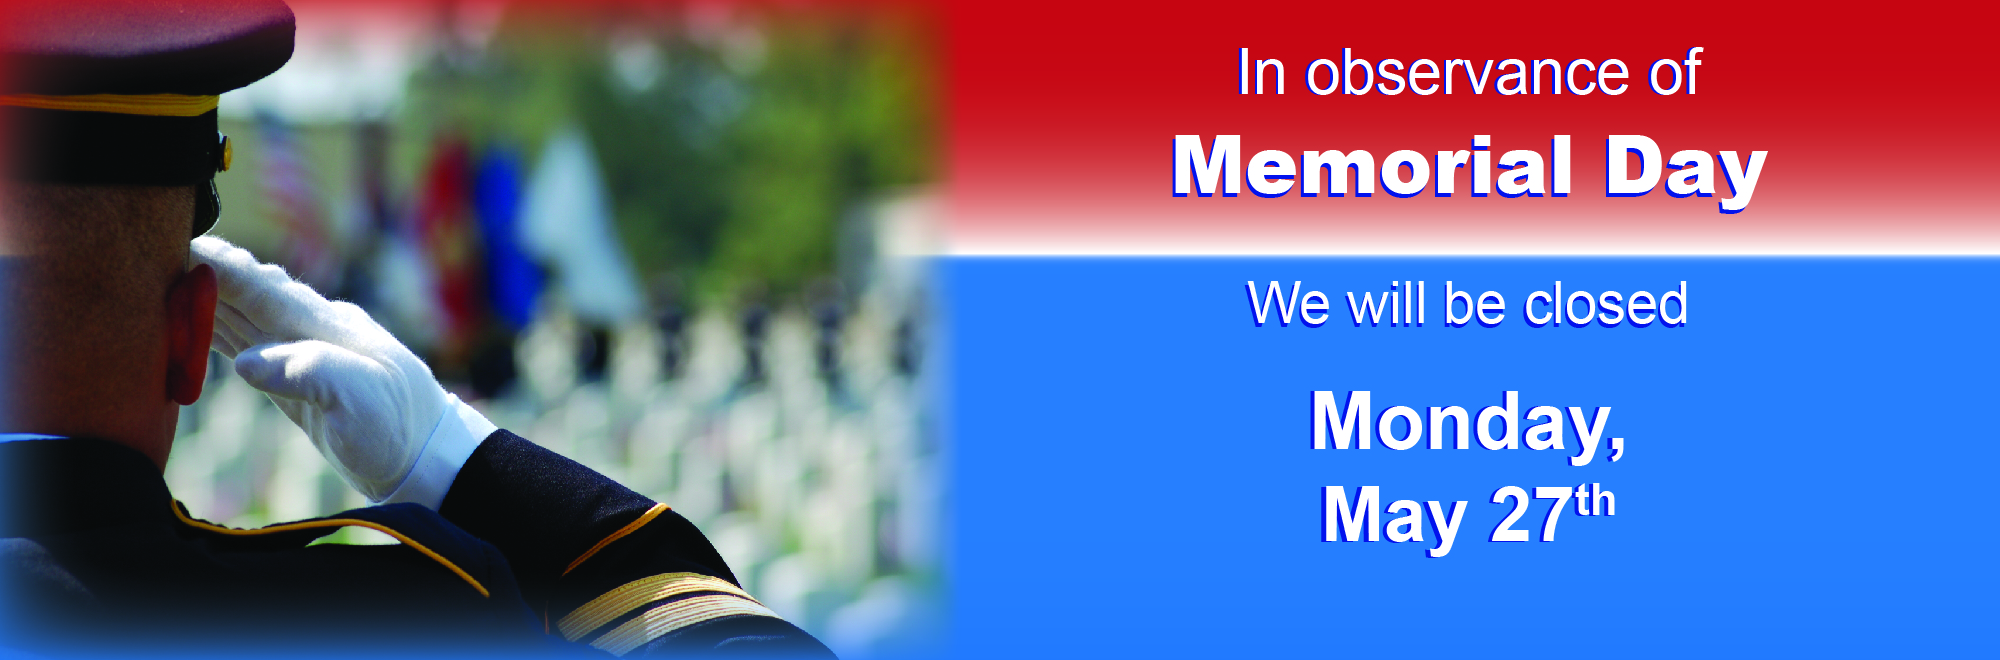 in observance of memorial day we will be closed Monday May 27th. 